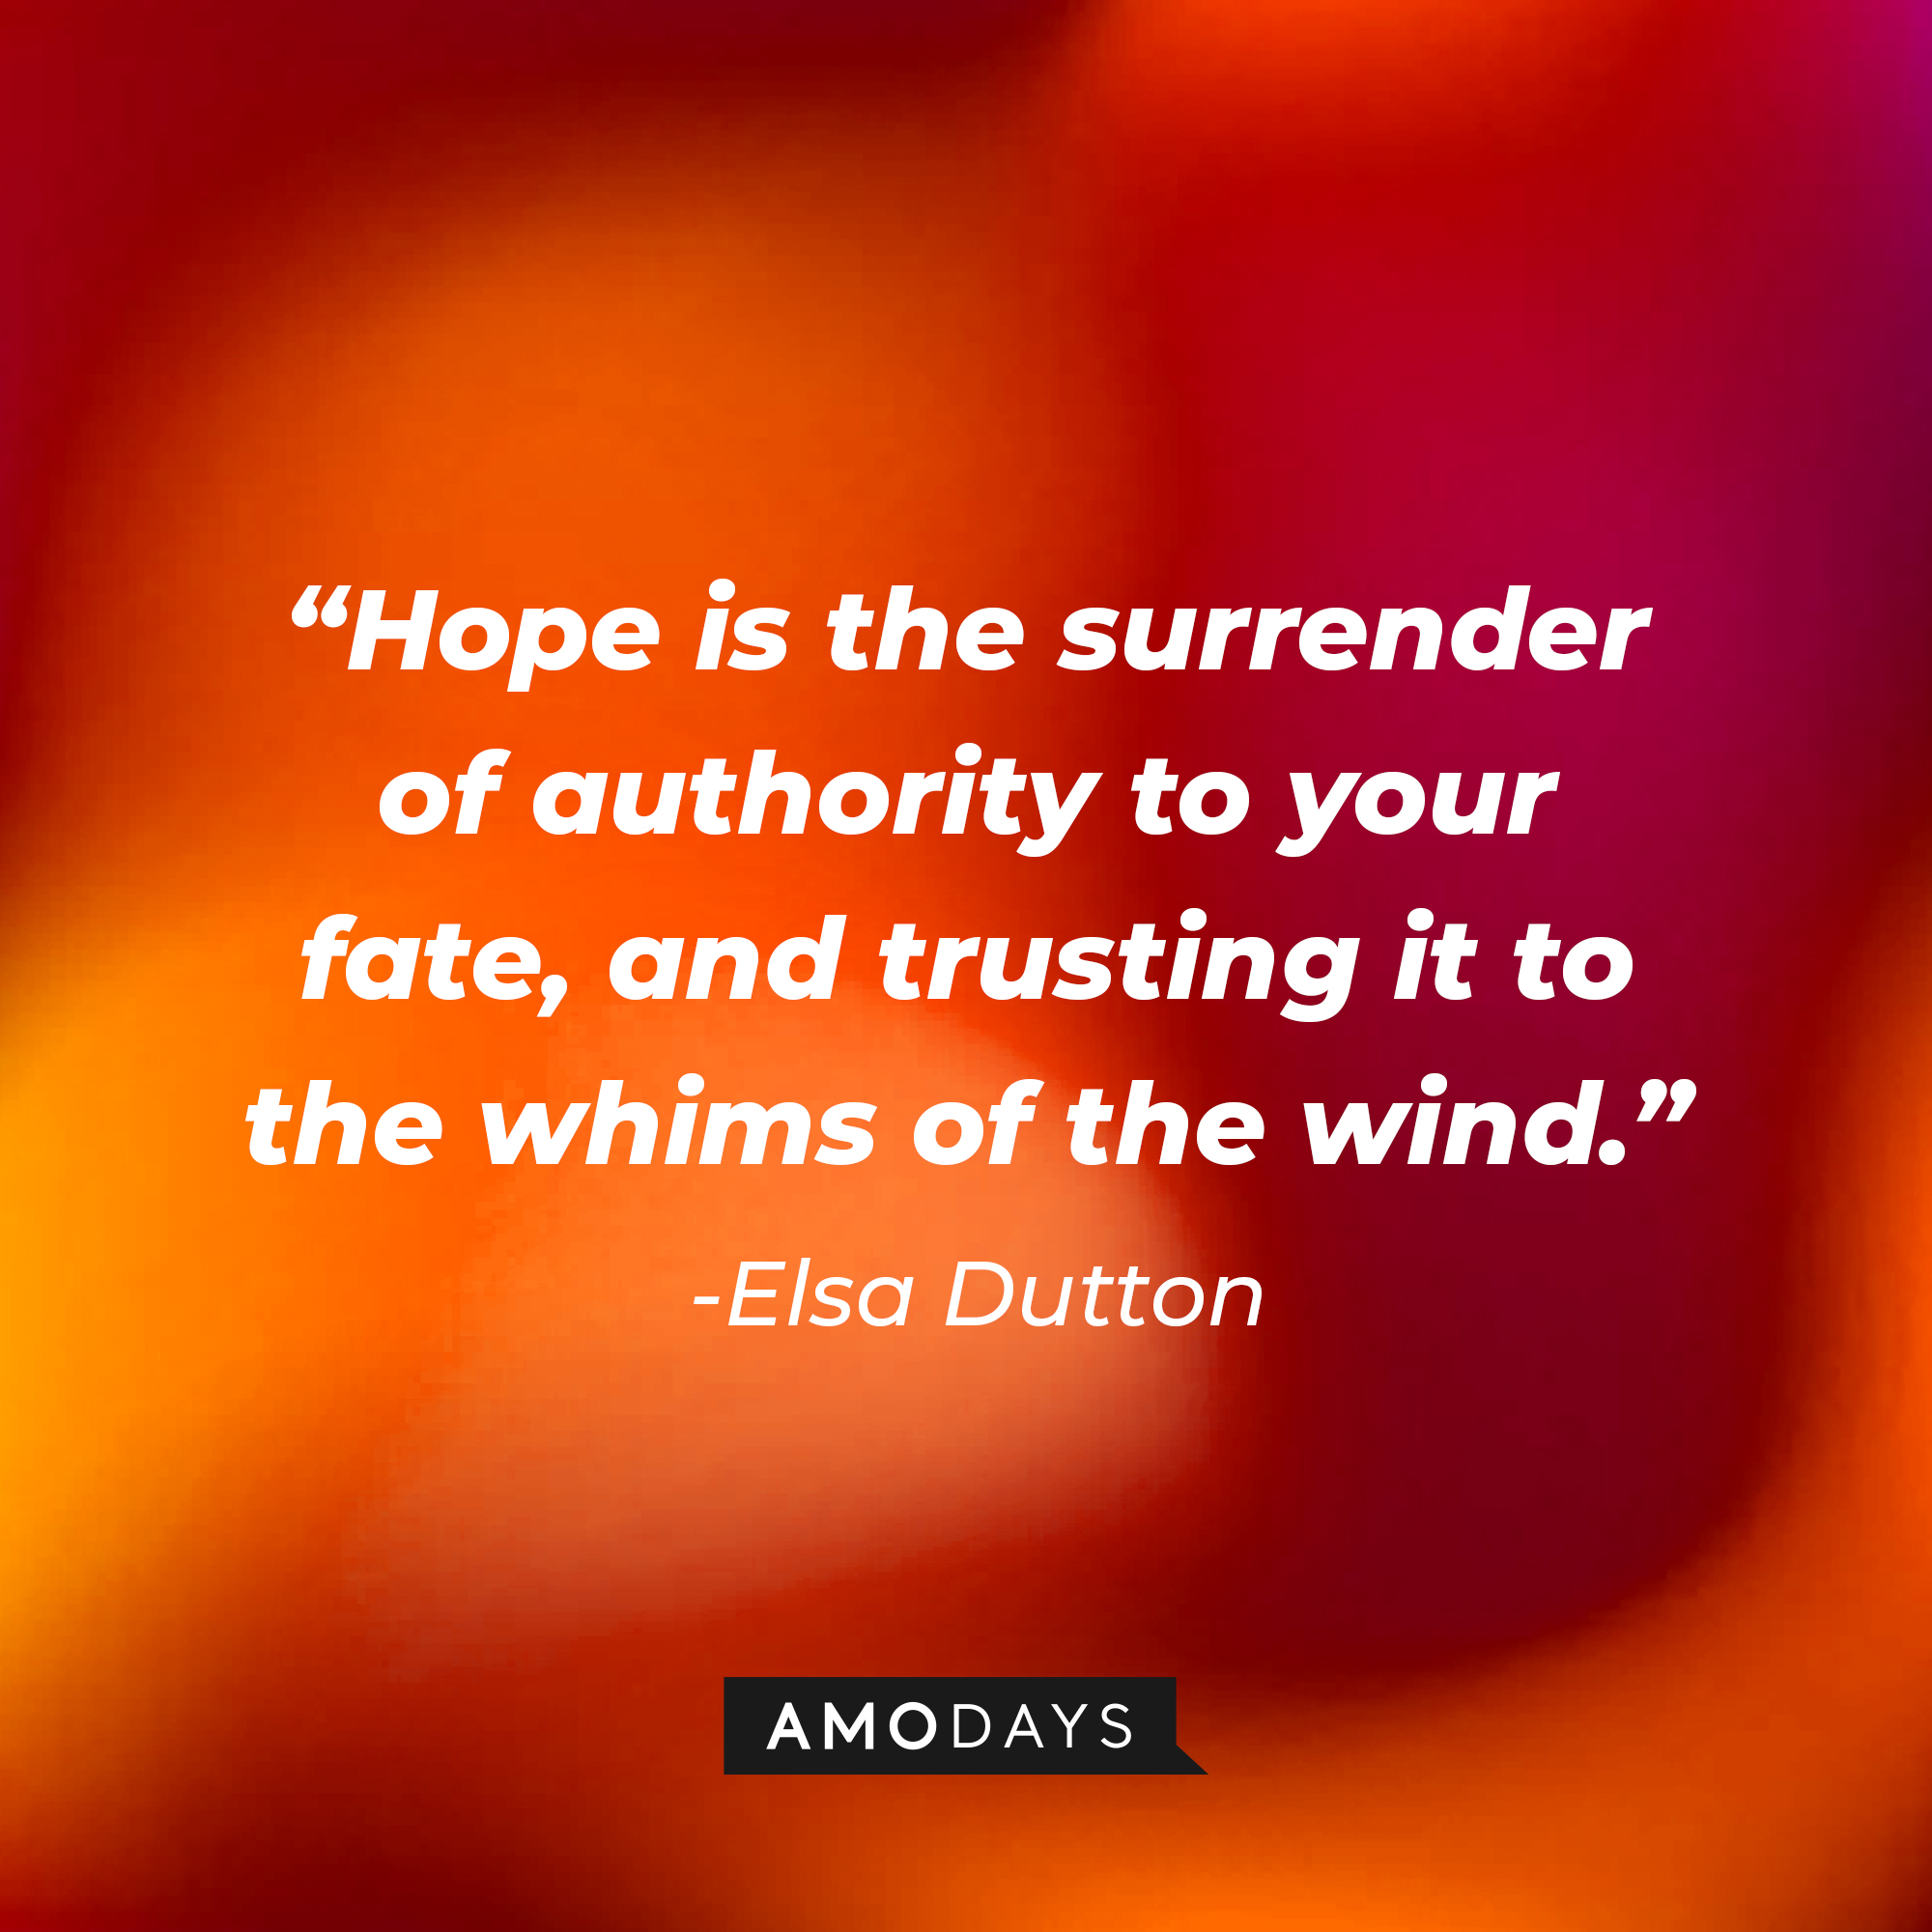 Elsa Dutton's quote: "Hope is the surrender of authority to your fate, and trusting it to the whims of the wind." | Source: AmoDays